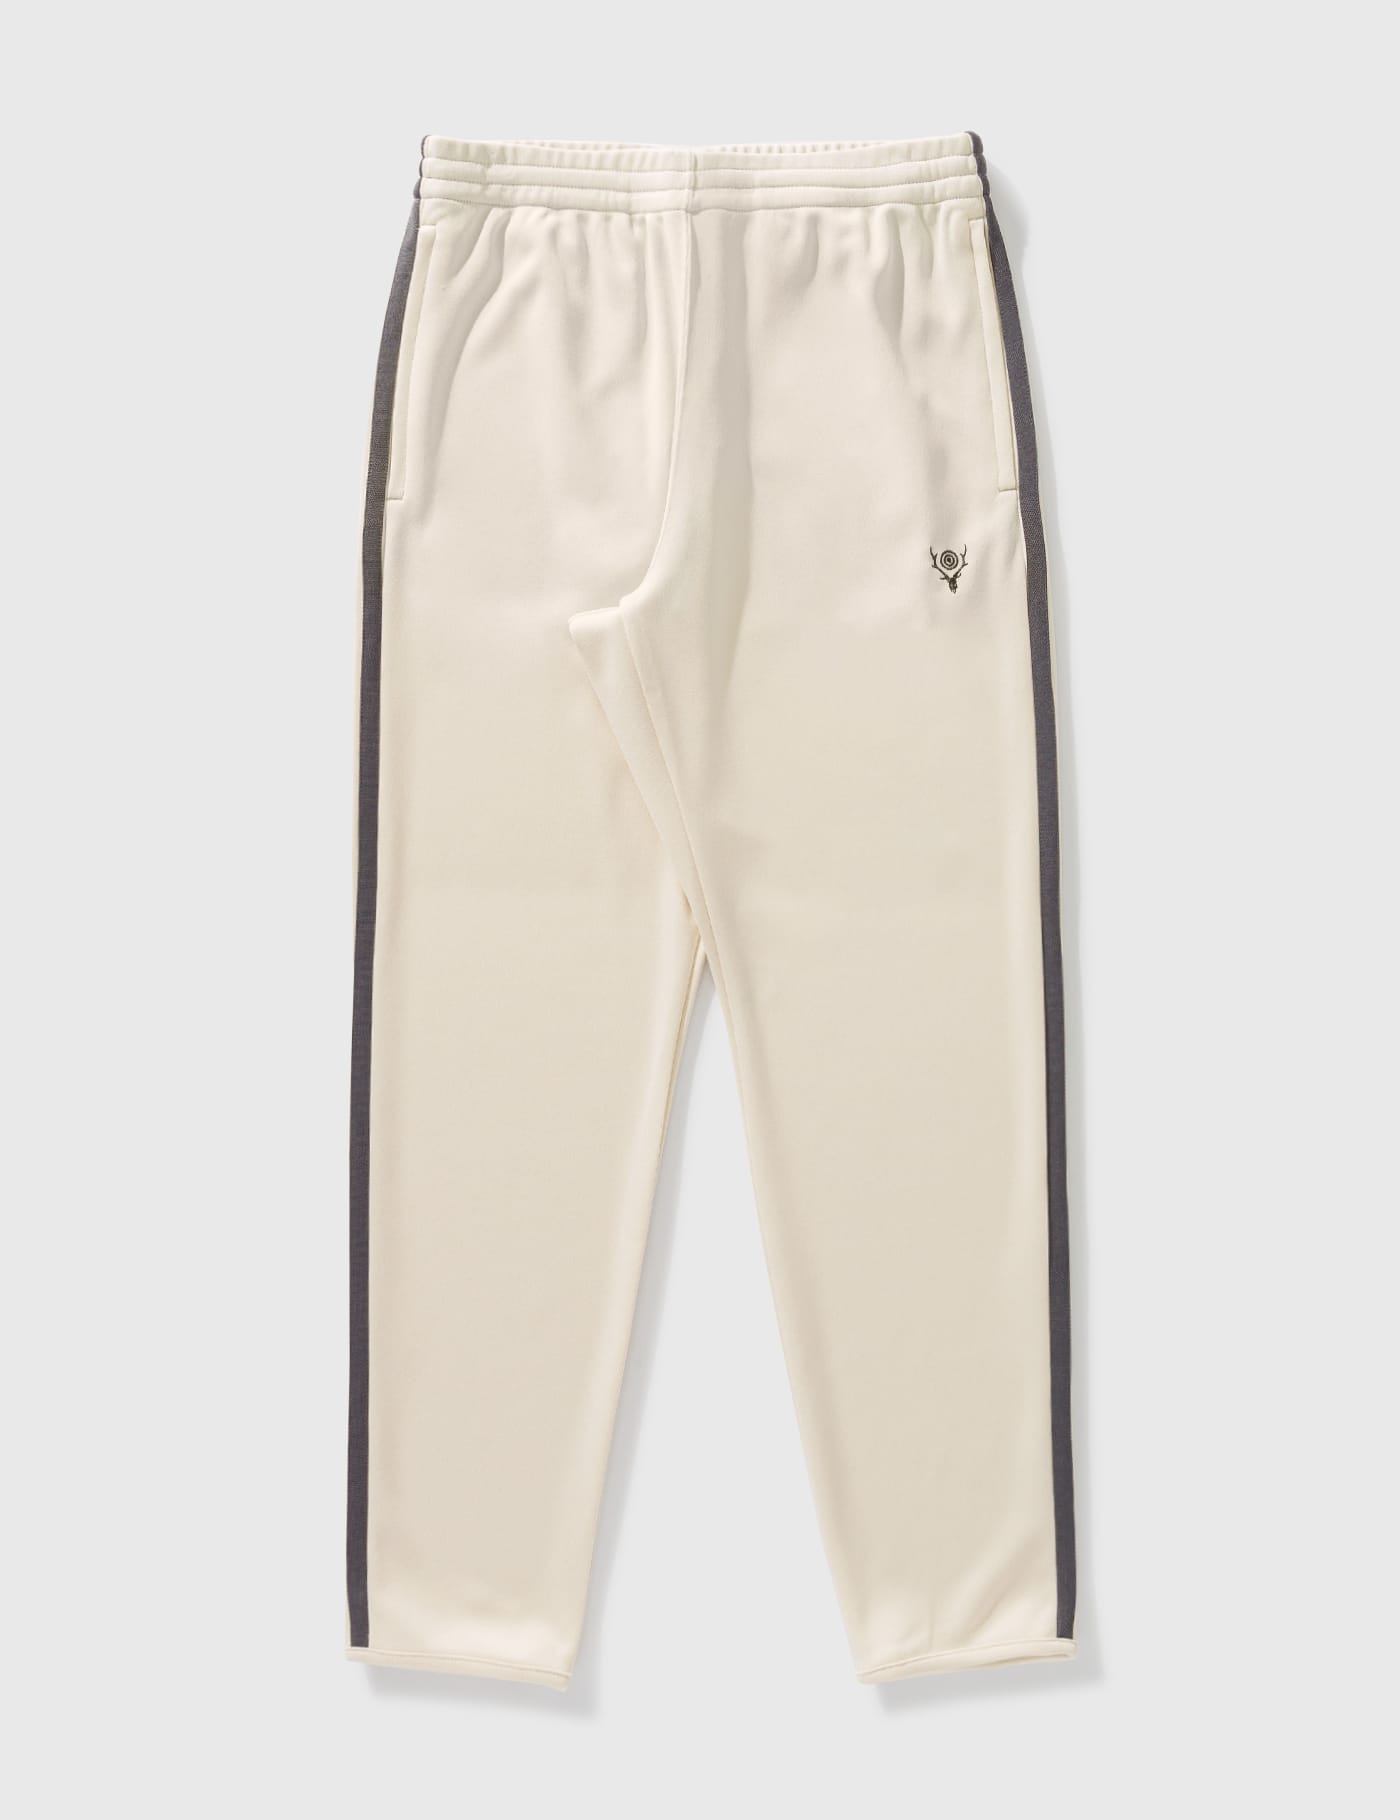 South2 West8 - Trainer Pants | HBX - Globally Curated Fashion and 